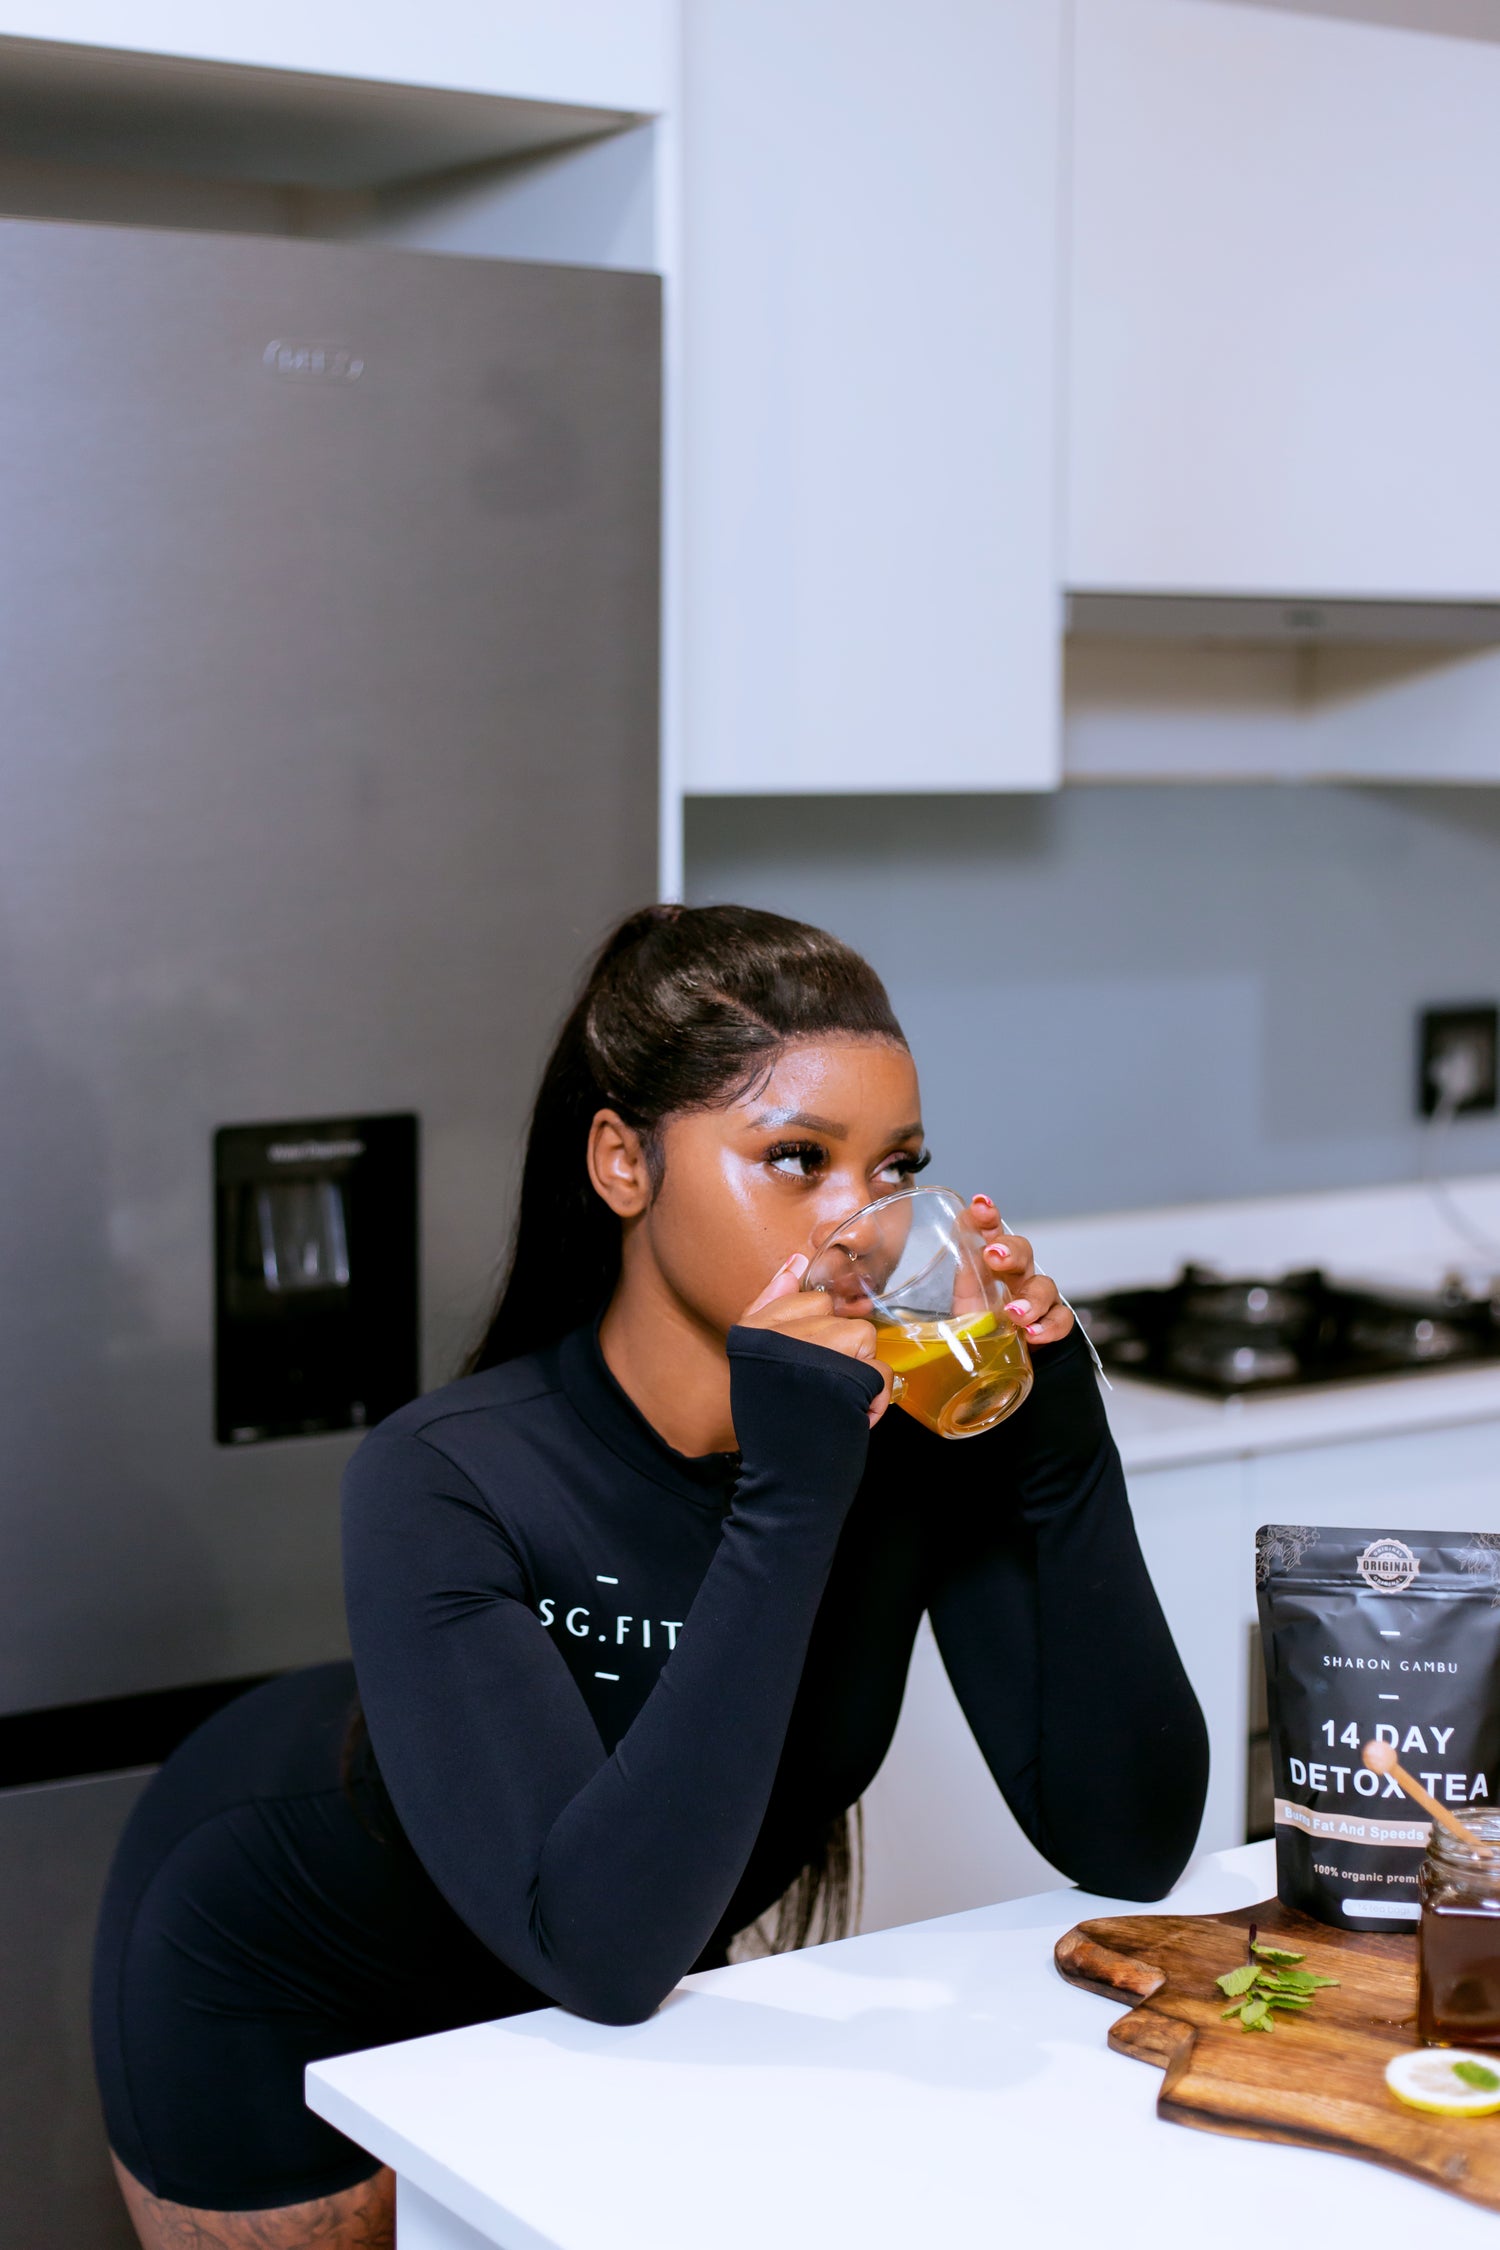 A health-conscious woman in a sleek SG.FIT black athletic top enjoys a calming sip of golden-hued detox tea in a modern kitchen setting. The countertop is clean and white, reflecting a lifestyle of clarity and purity. A wooden board, fresh mint, a sliced lemon, and a jar of honey accompany the package of Sharon Gambu 14 Day Detox Tea, highlighting the natural and organic elements of the tea experience.